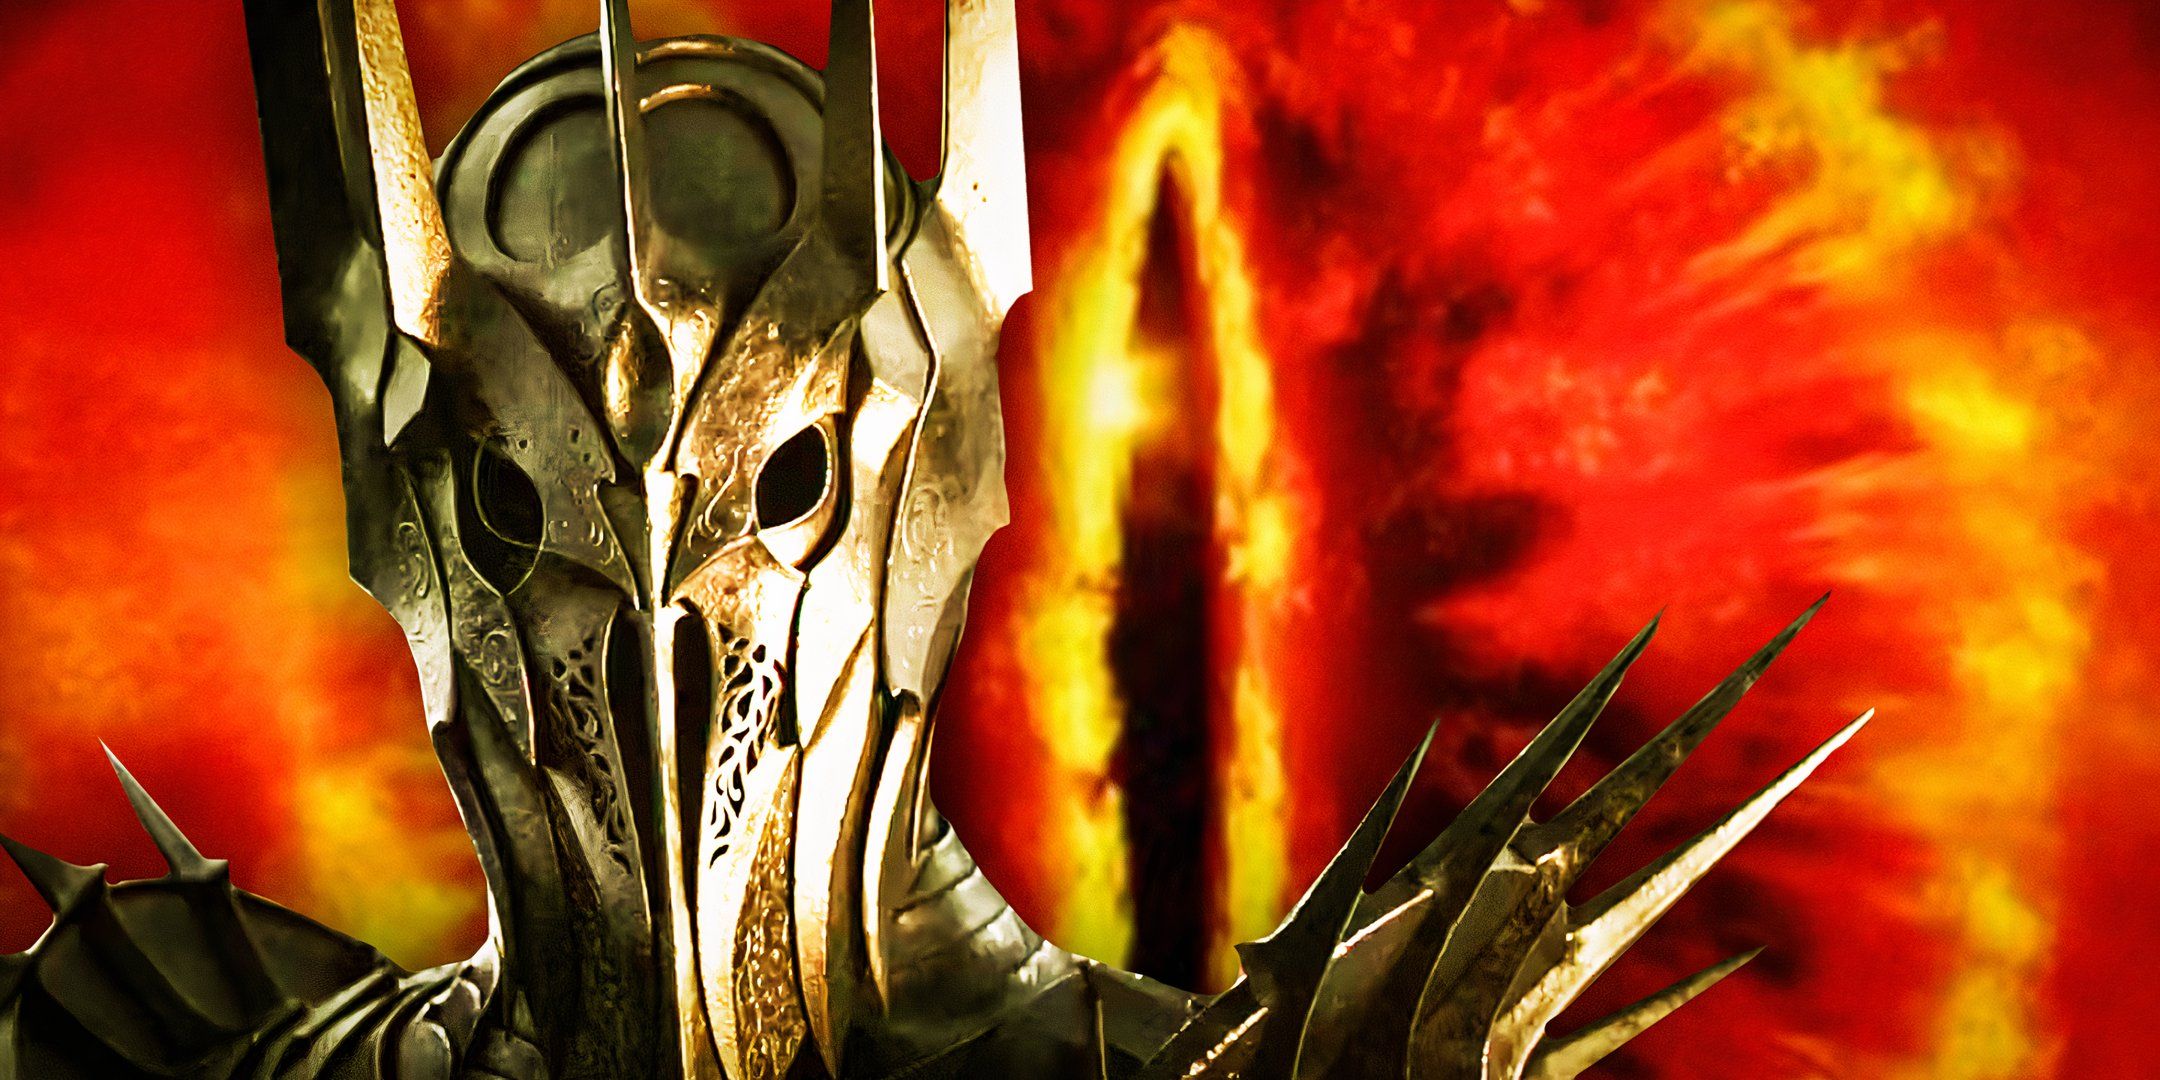 Sauron-from-The-Lord-Of-The-Rings-Franchise- (1)